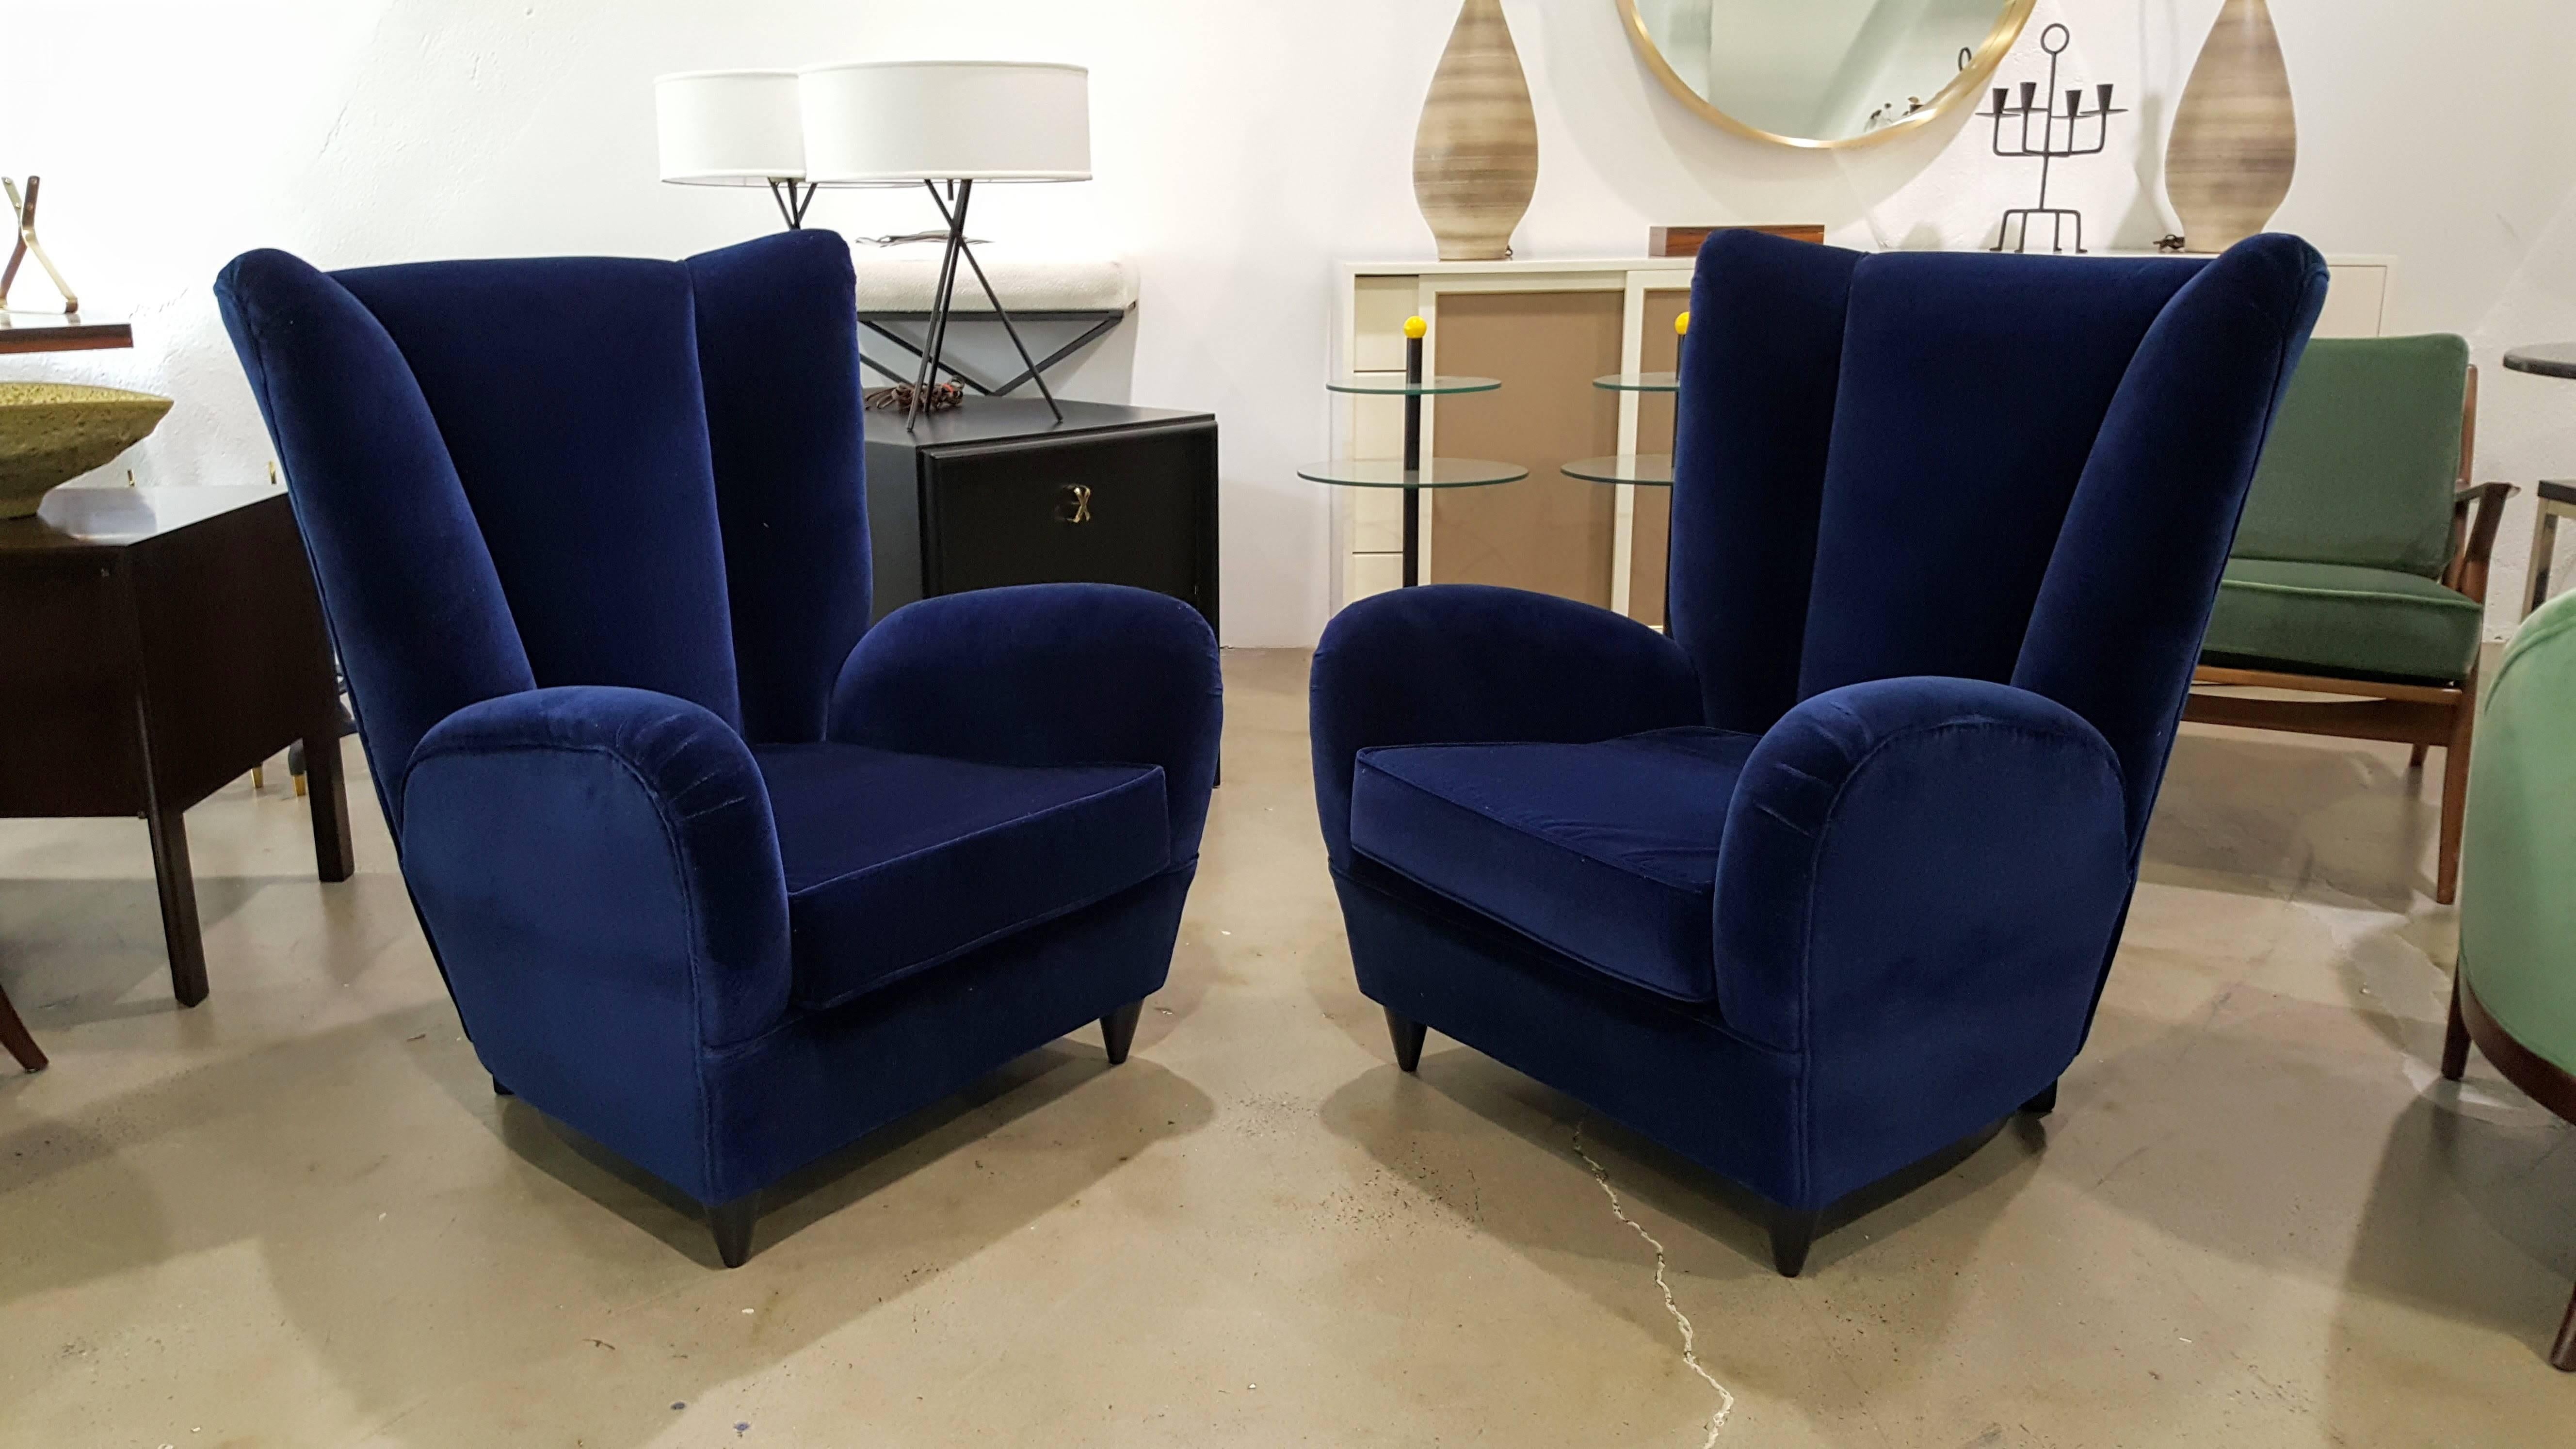 Pair of modern sculptural Italian lounge chairs after Paolo Buffa, Italy, 1950s. Newly upholstered in a vibrant royal blue velvet.

See this item in our private NYC showroom! Refine Limited is located in the heart of Chelsea at the history